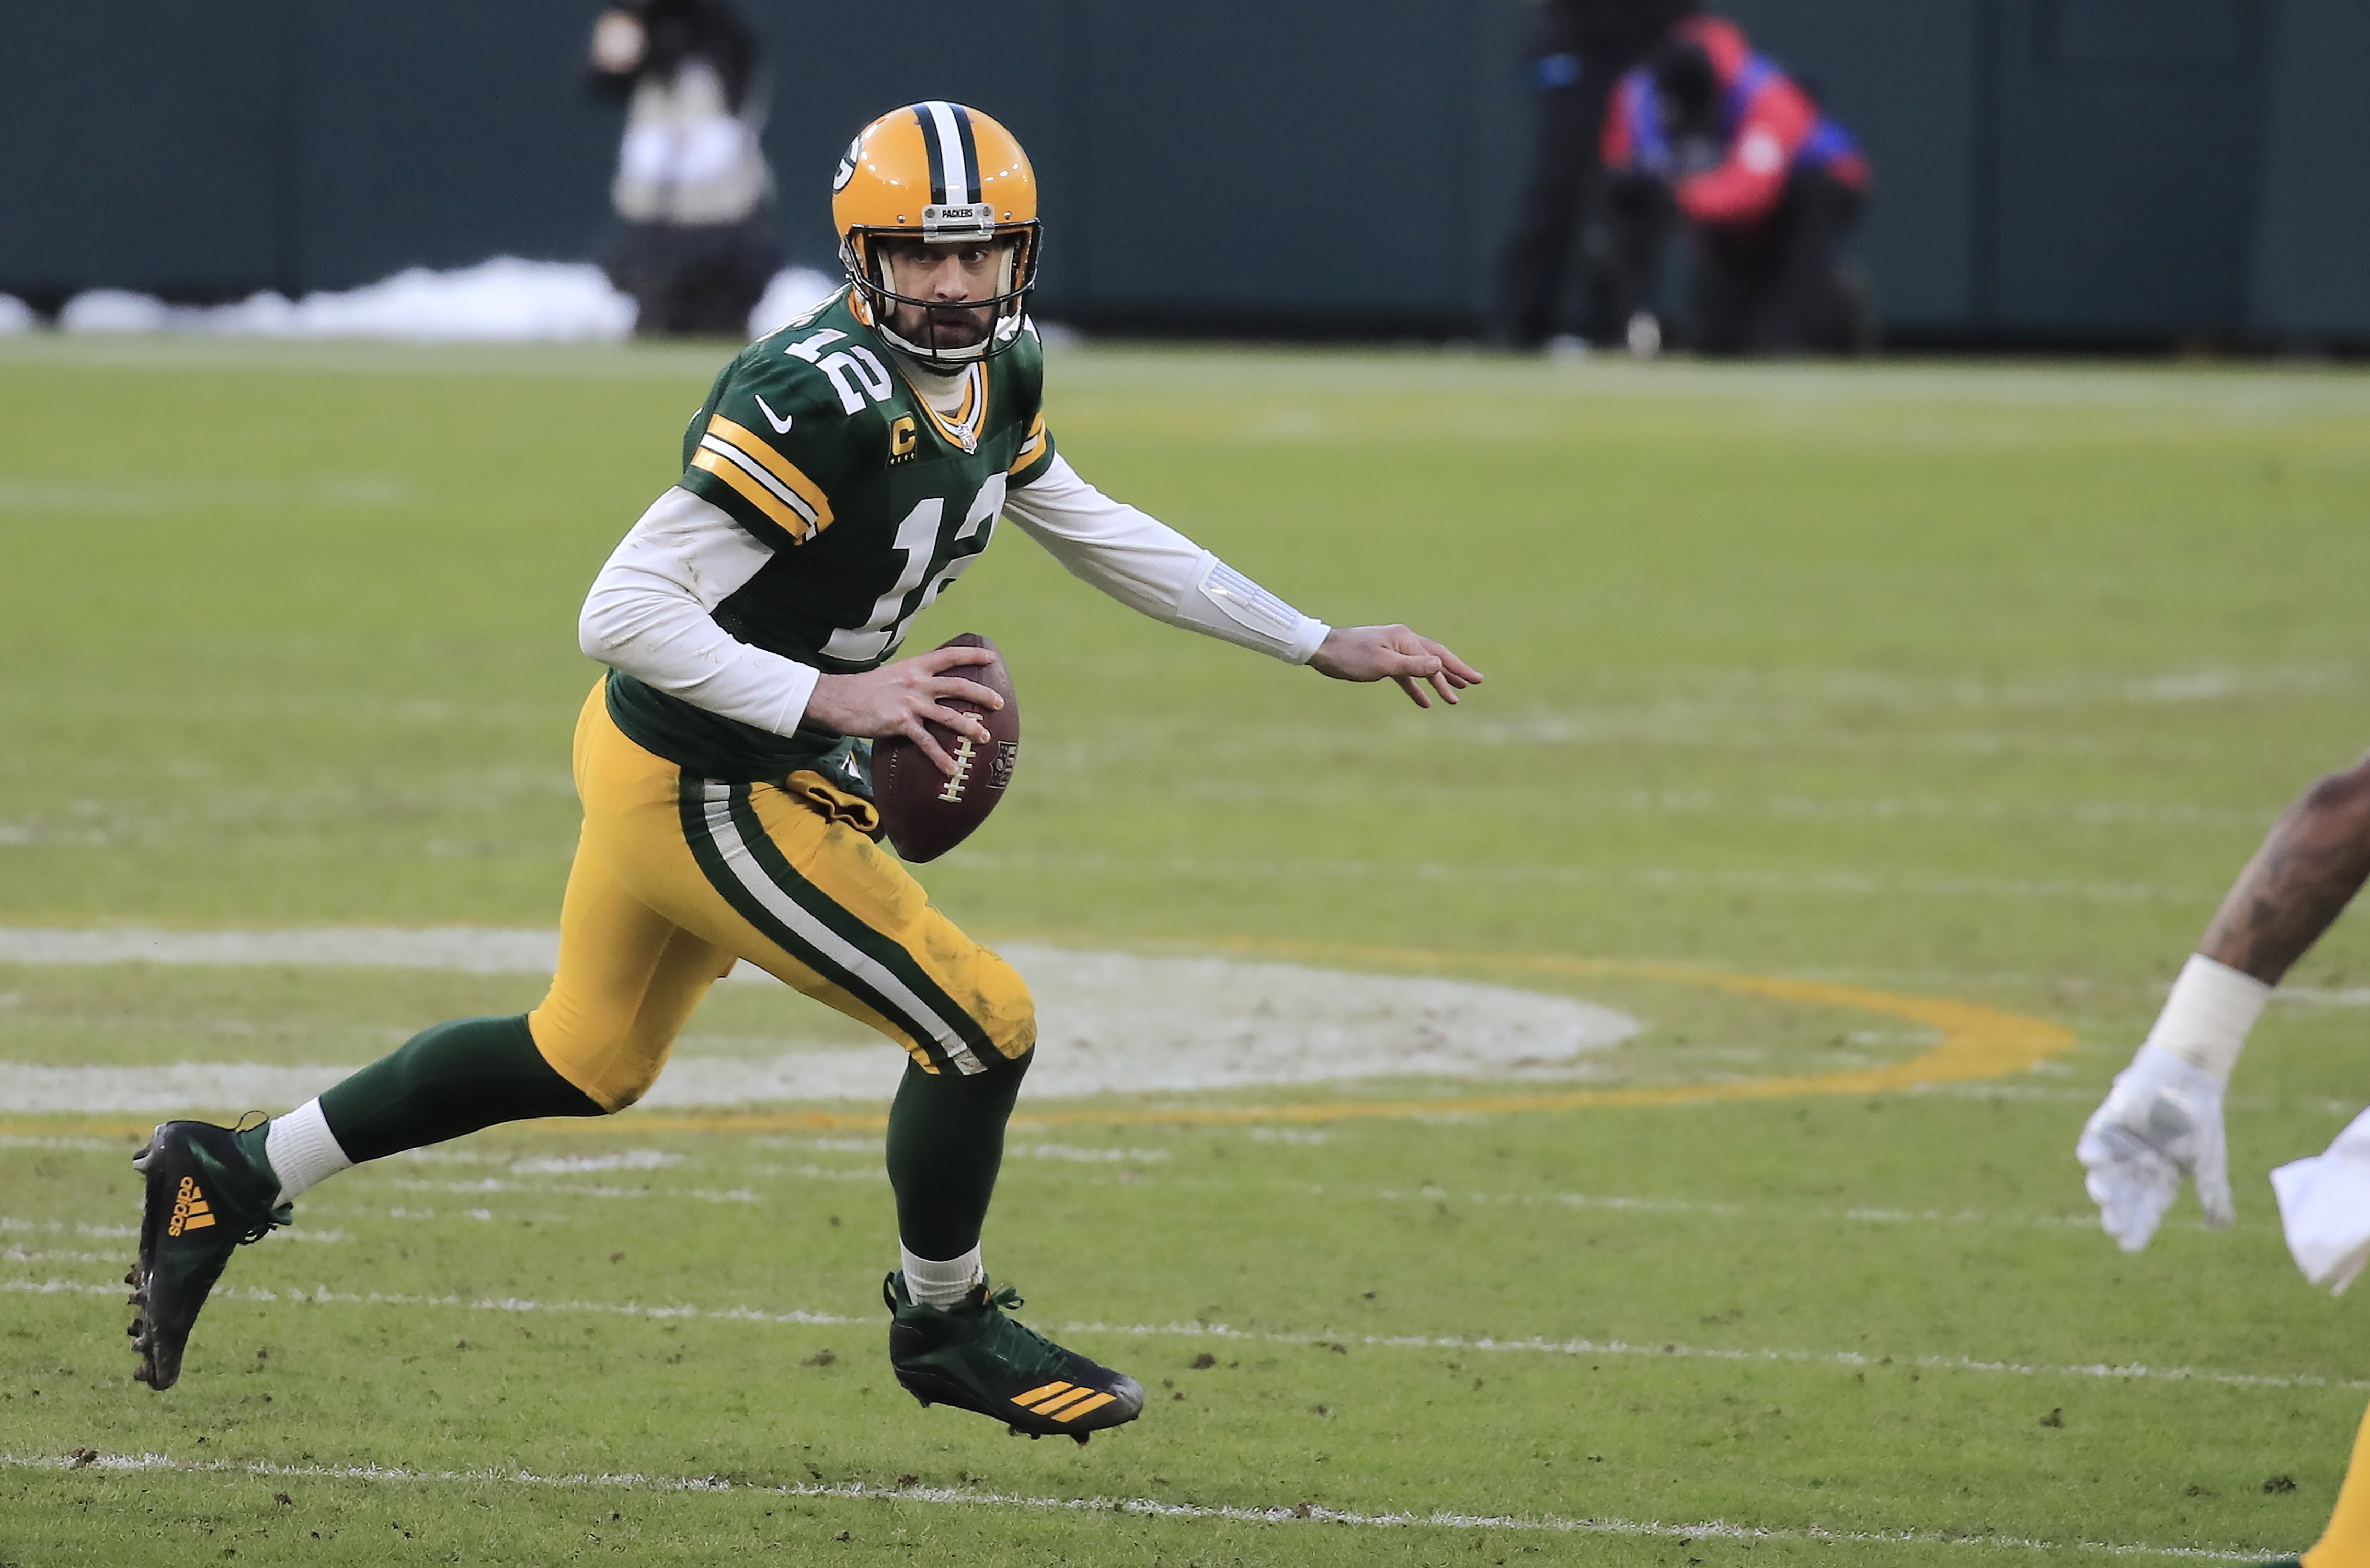 24-10. Rodgers y los Packers suman seis triunfos - Infobae